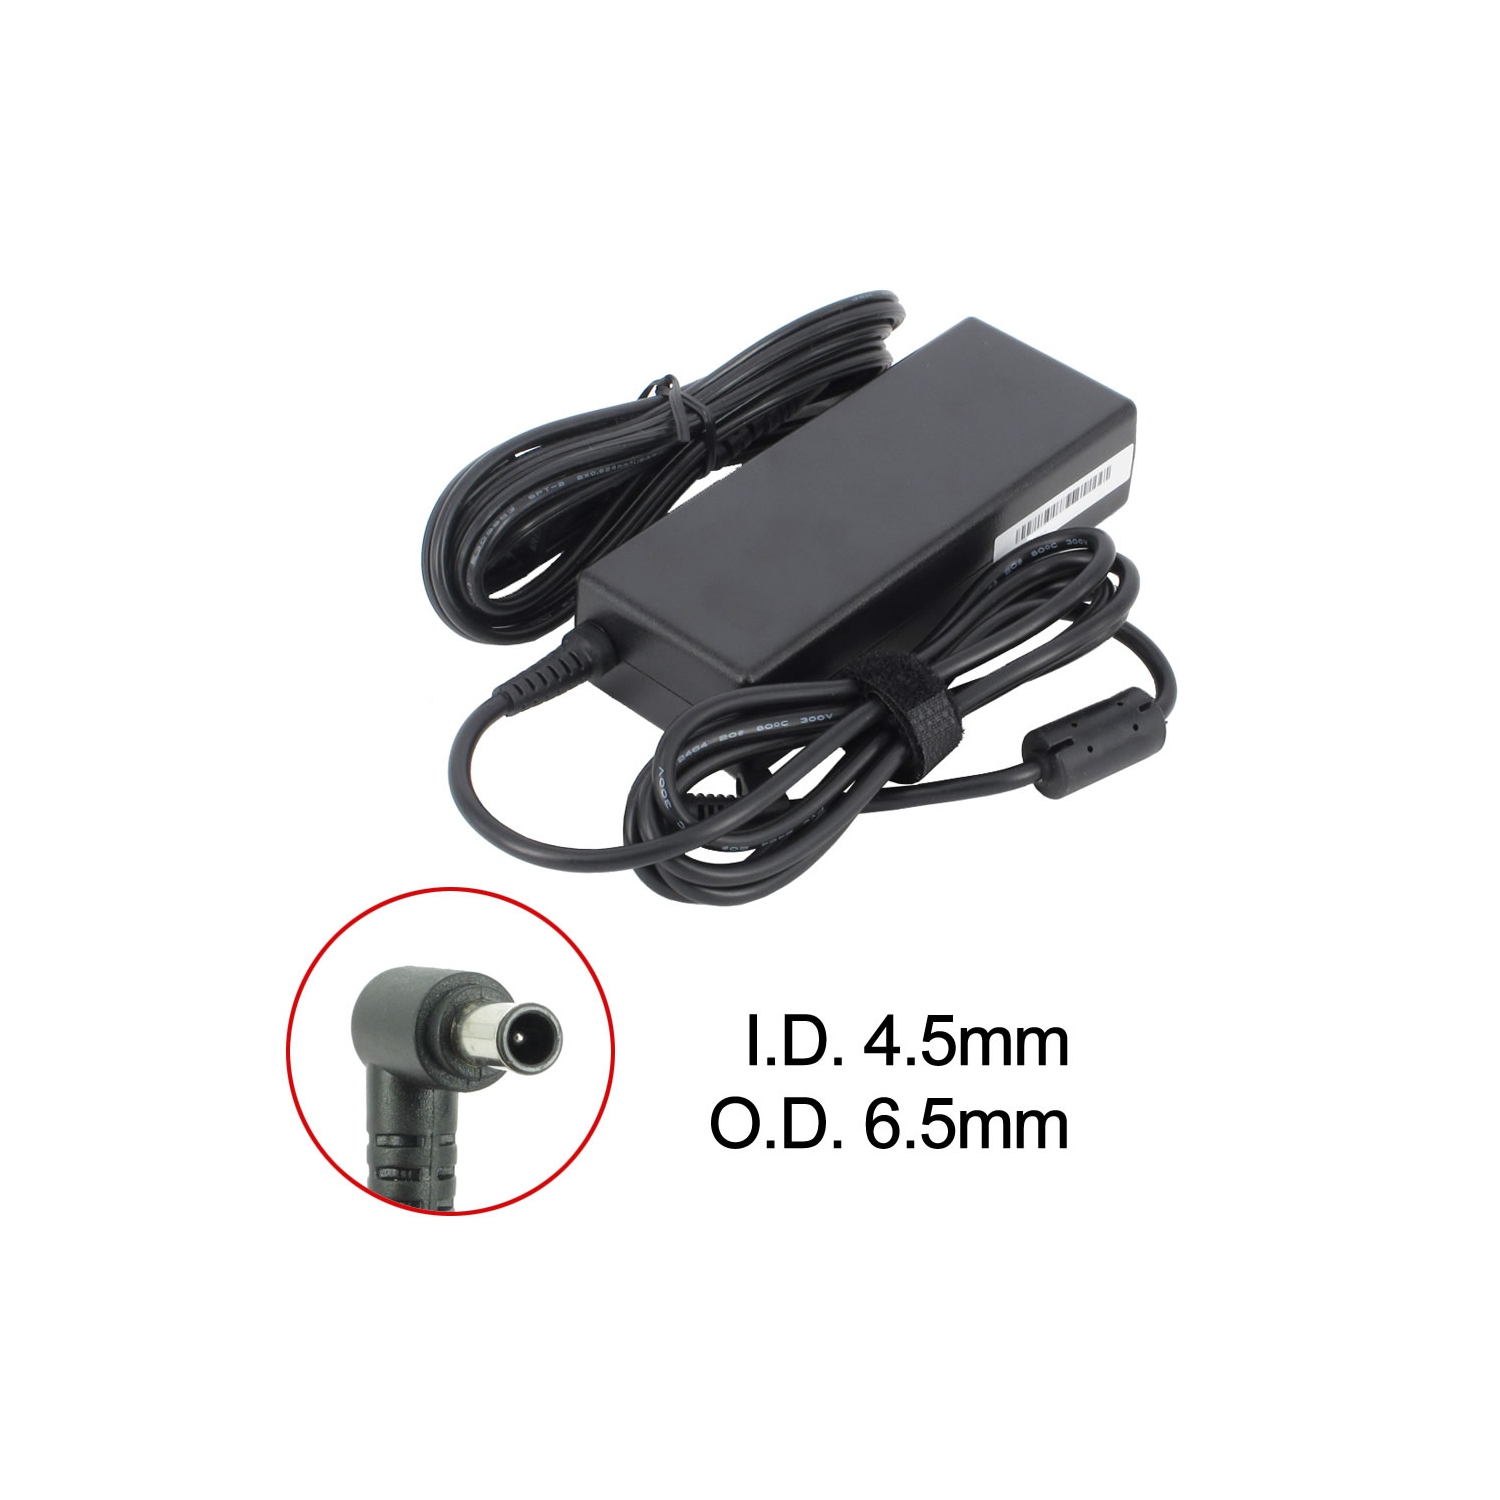 Brand New Laptop AC Adapter for Sony VAIO VGN-FE45G/W, PCGA-AC19V10, PCGA-AC19V3, VGP-AC19V20, VGP-AC19V30, VGP-AC19V51